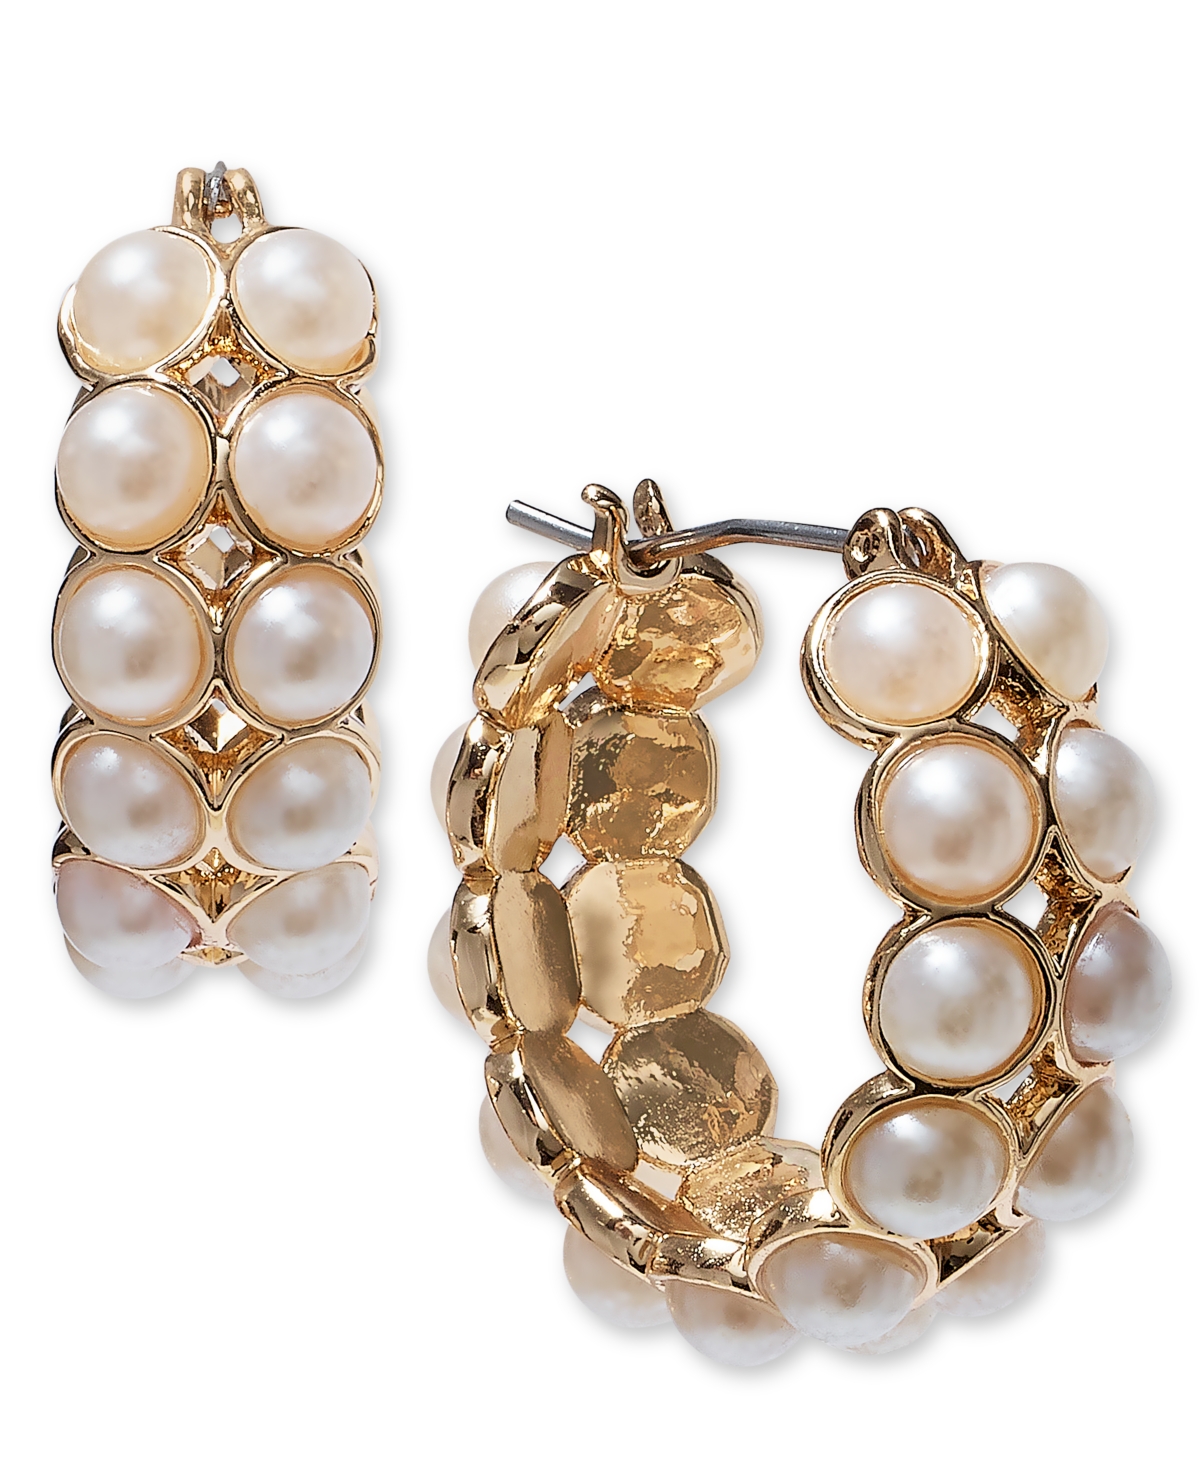 Gold-Tone Small Imitation Pearl Double-Row Hoop Earrings, 0.85", Created for Macy's - White